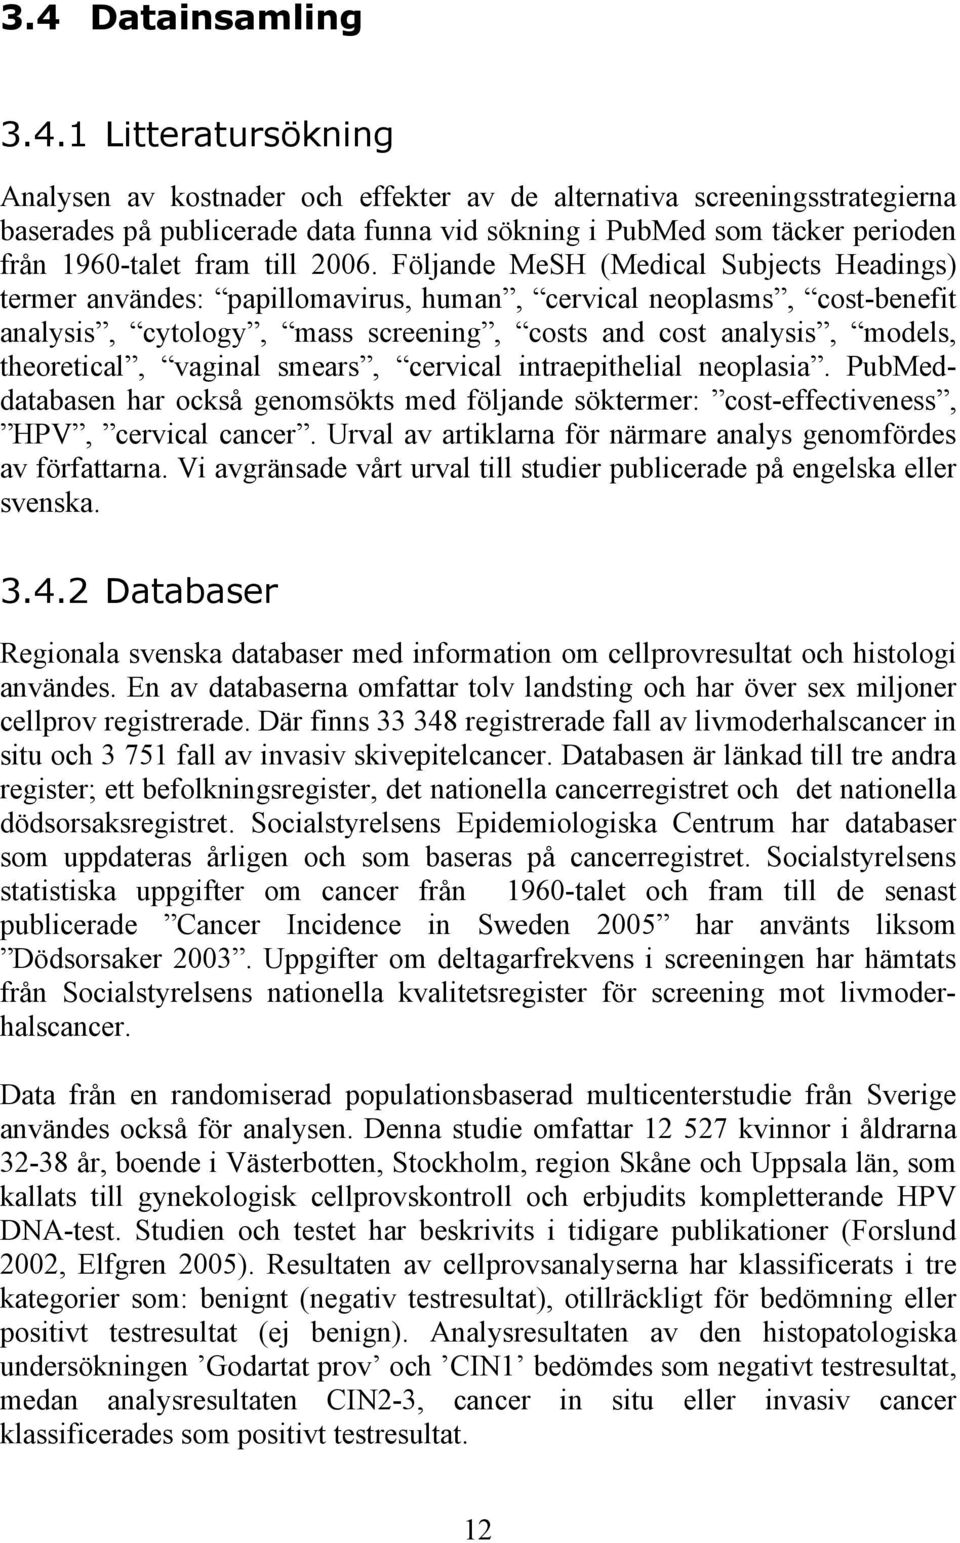 Följande MeSH (Medical Subjects Headings) termer användes: papillomavirus, human, cervical neoplasms, cost-benefit analysis, cytology, mass screening, costs and cost analysis, models, theoretical,